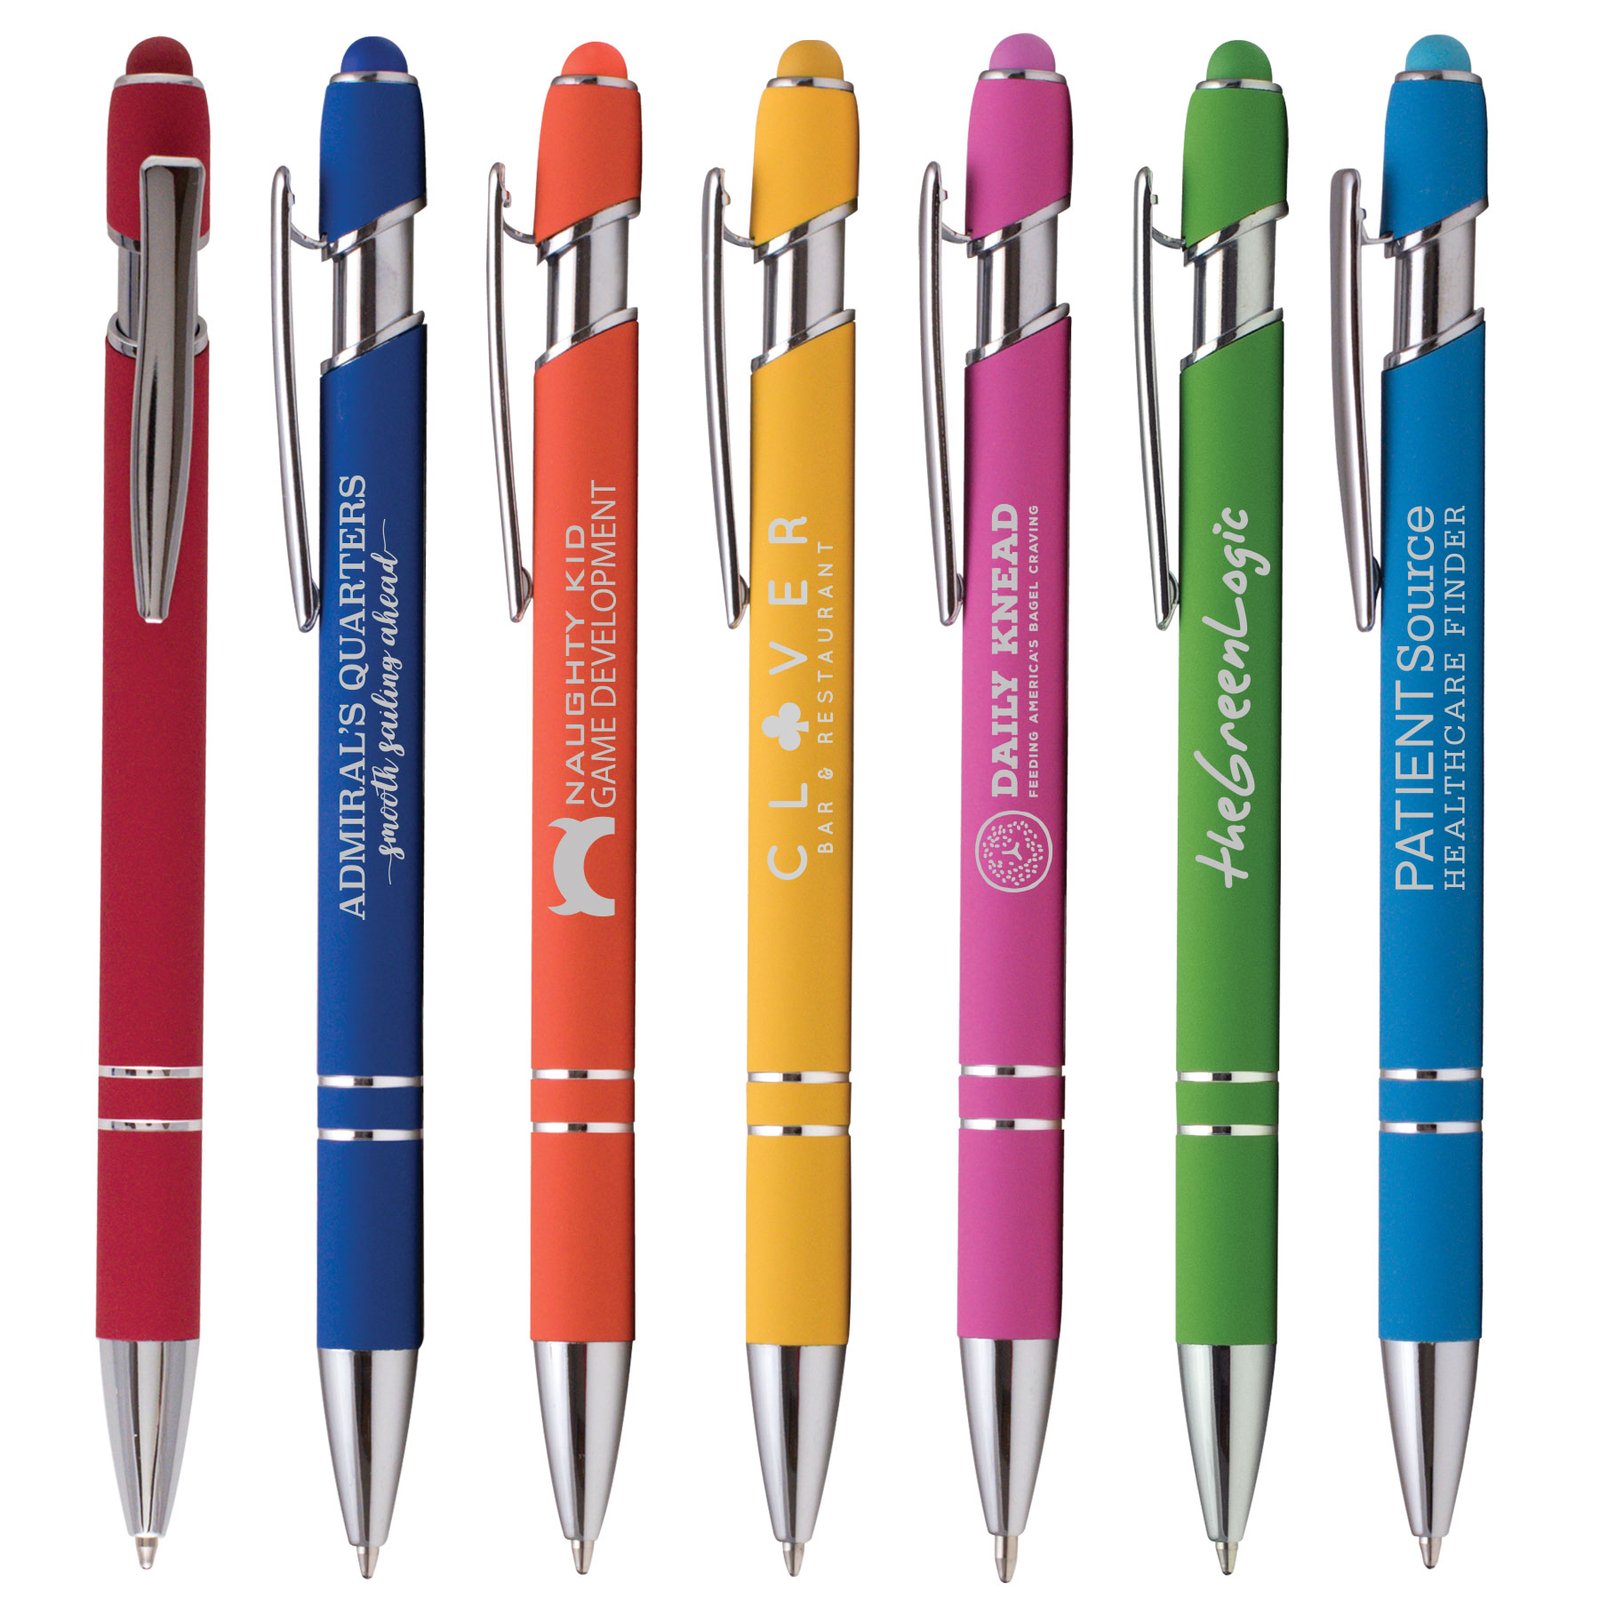 Ellipse Softy Brights Pen with Stylus